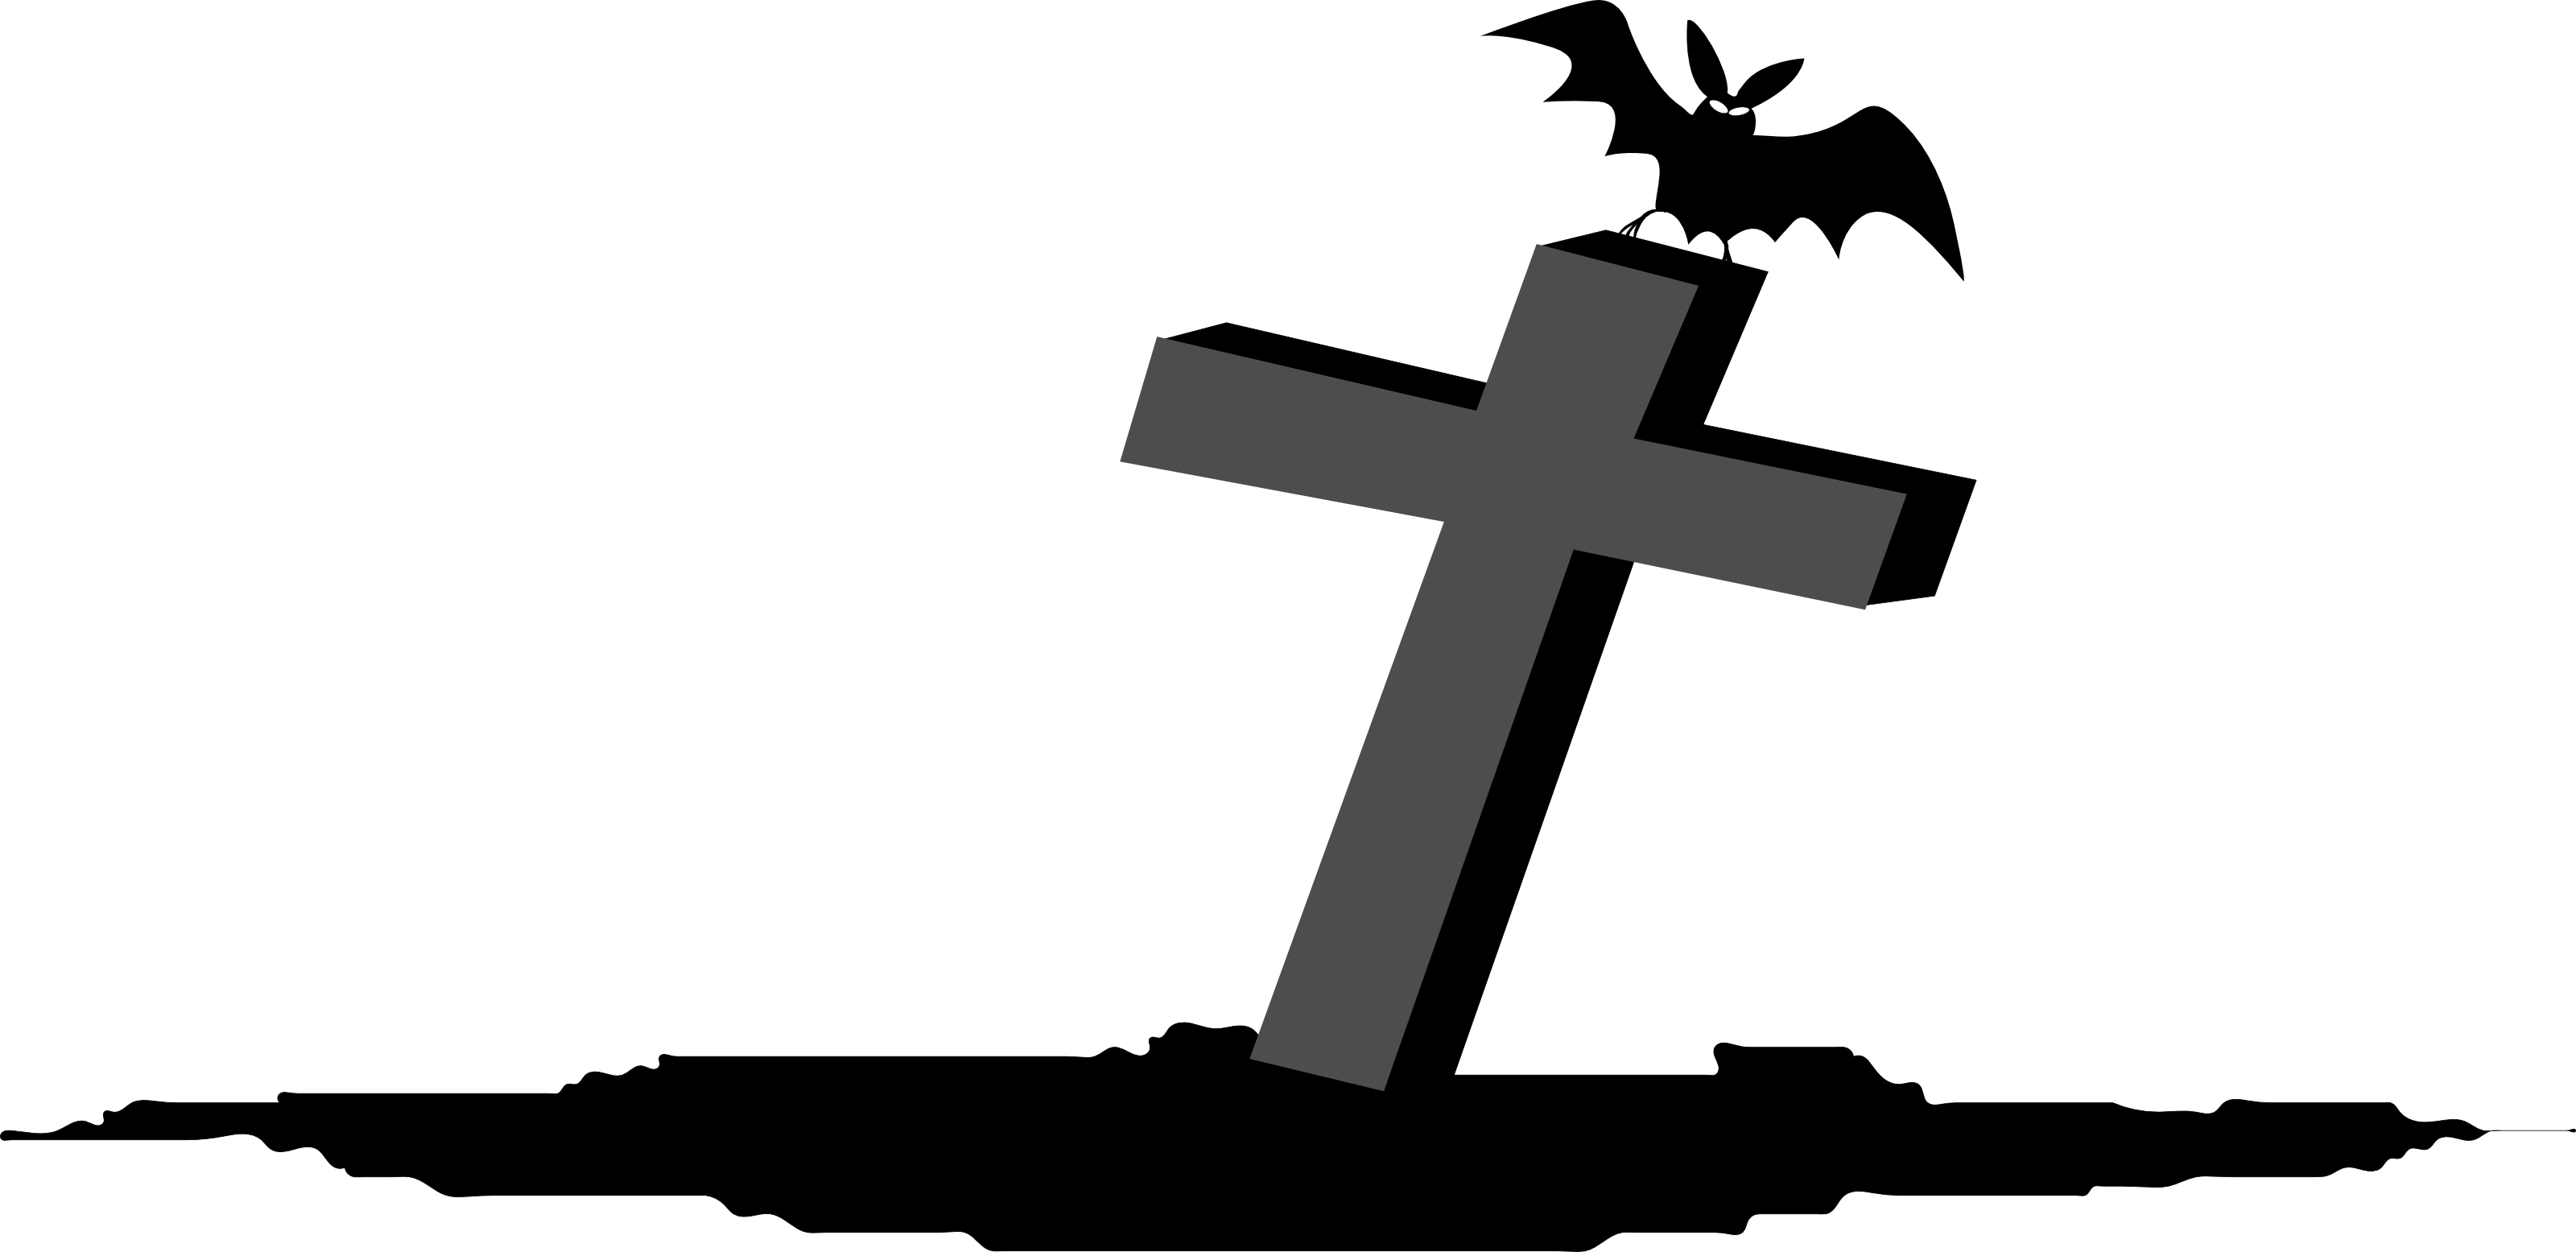 Bat On Tombstone - Free Halloween Vector Clipart Illustration by 0001129